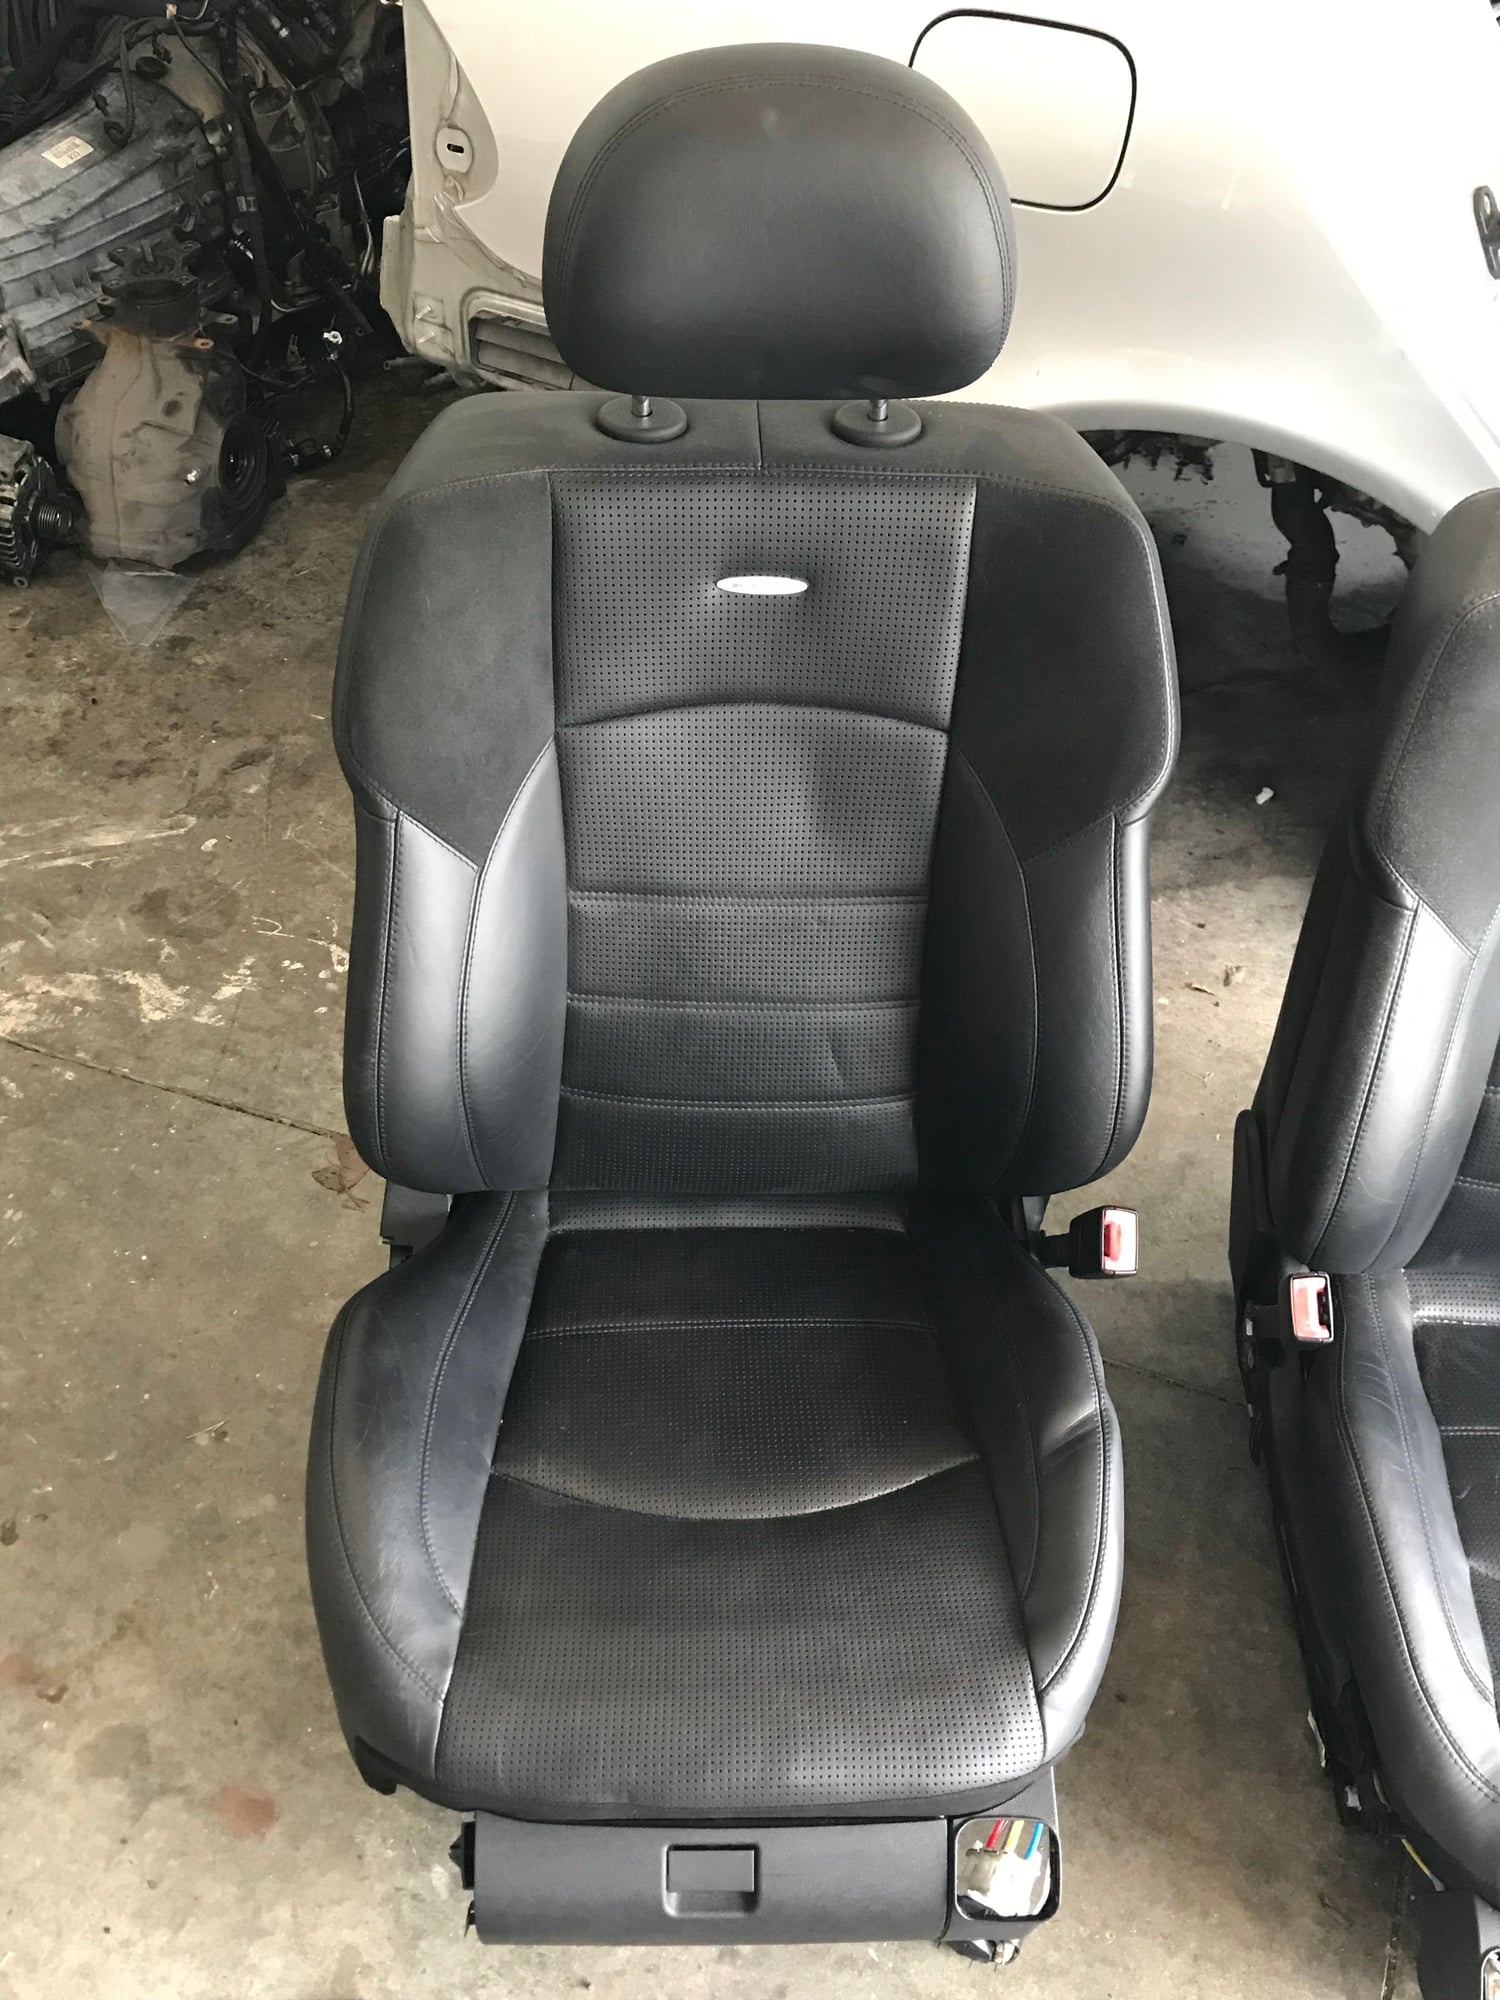 Interior/Upholstery - AMG Seats Pair W211 E63 M156 Black - Used - 2007 to 2010 Mercedes-Benz E63 AMG - Cincinnati, OH 45211, United States